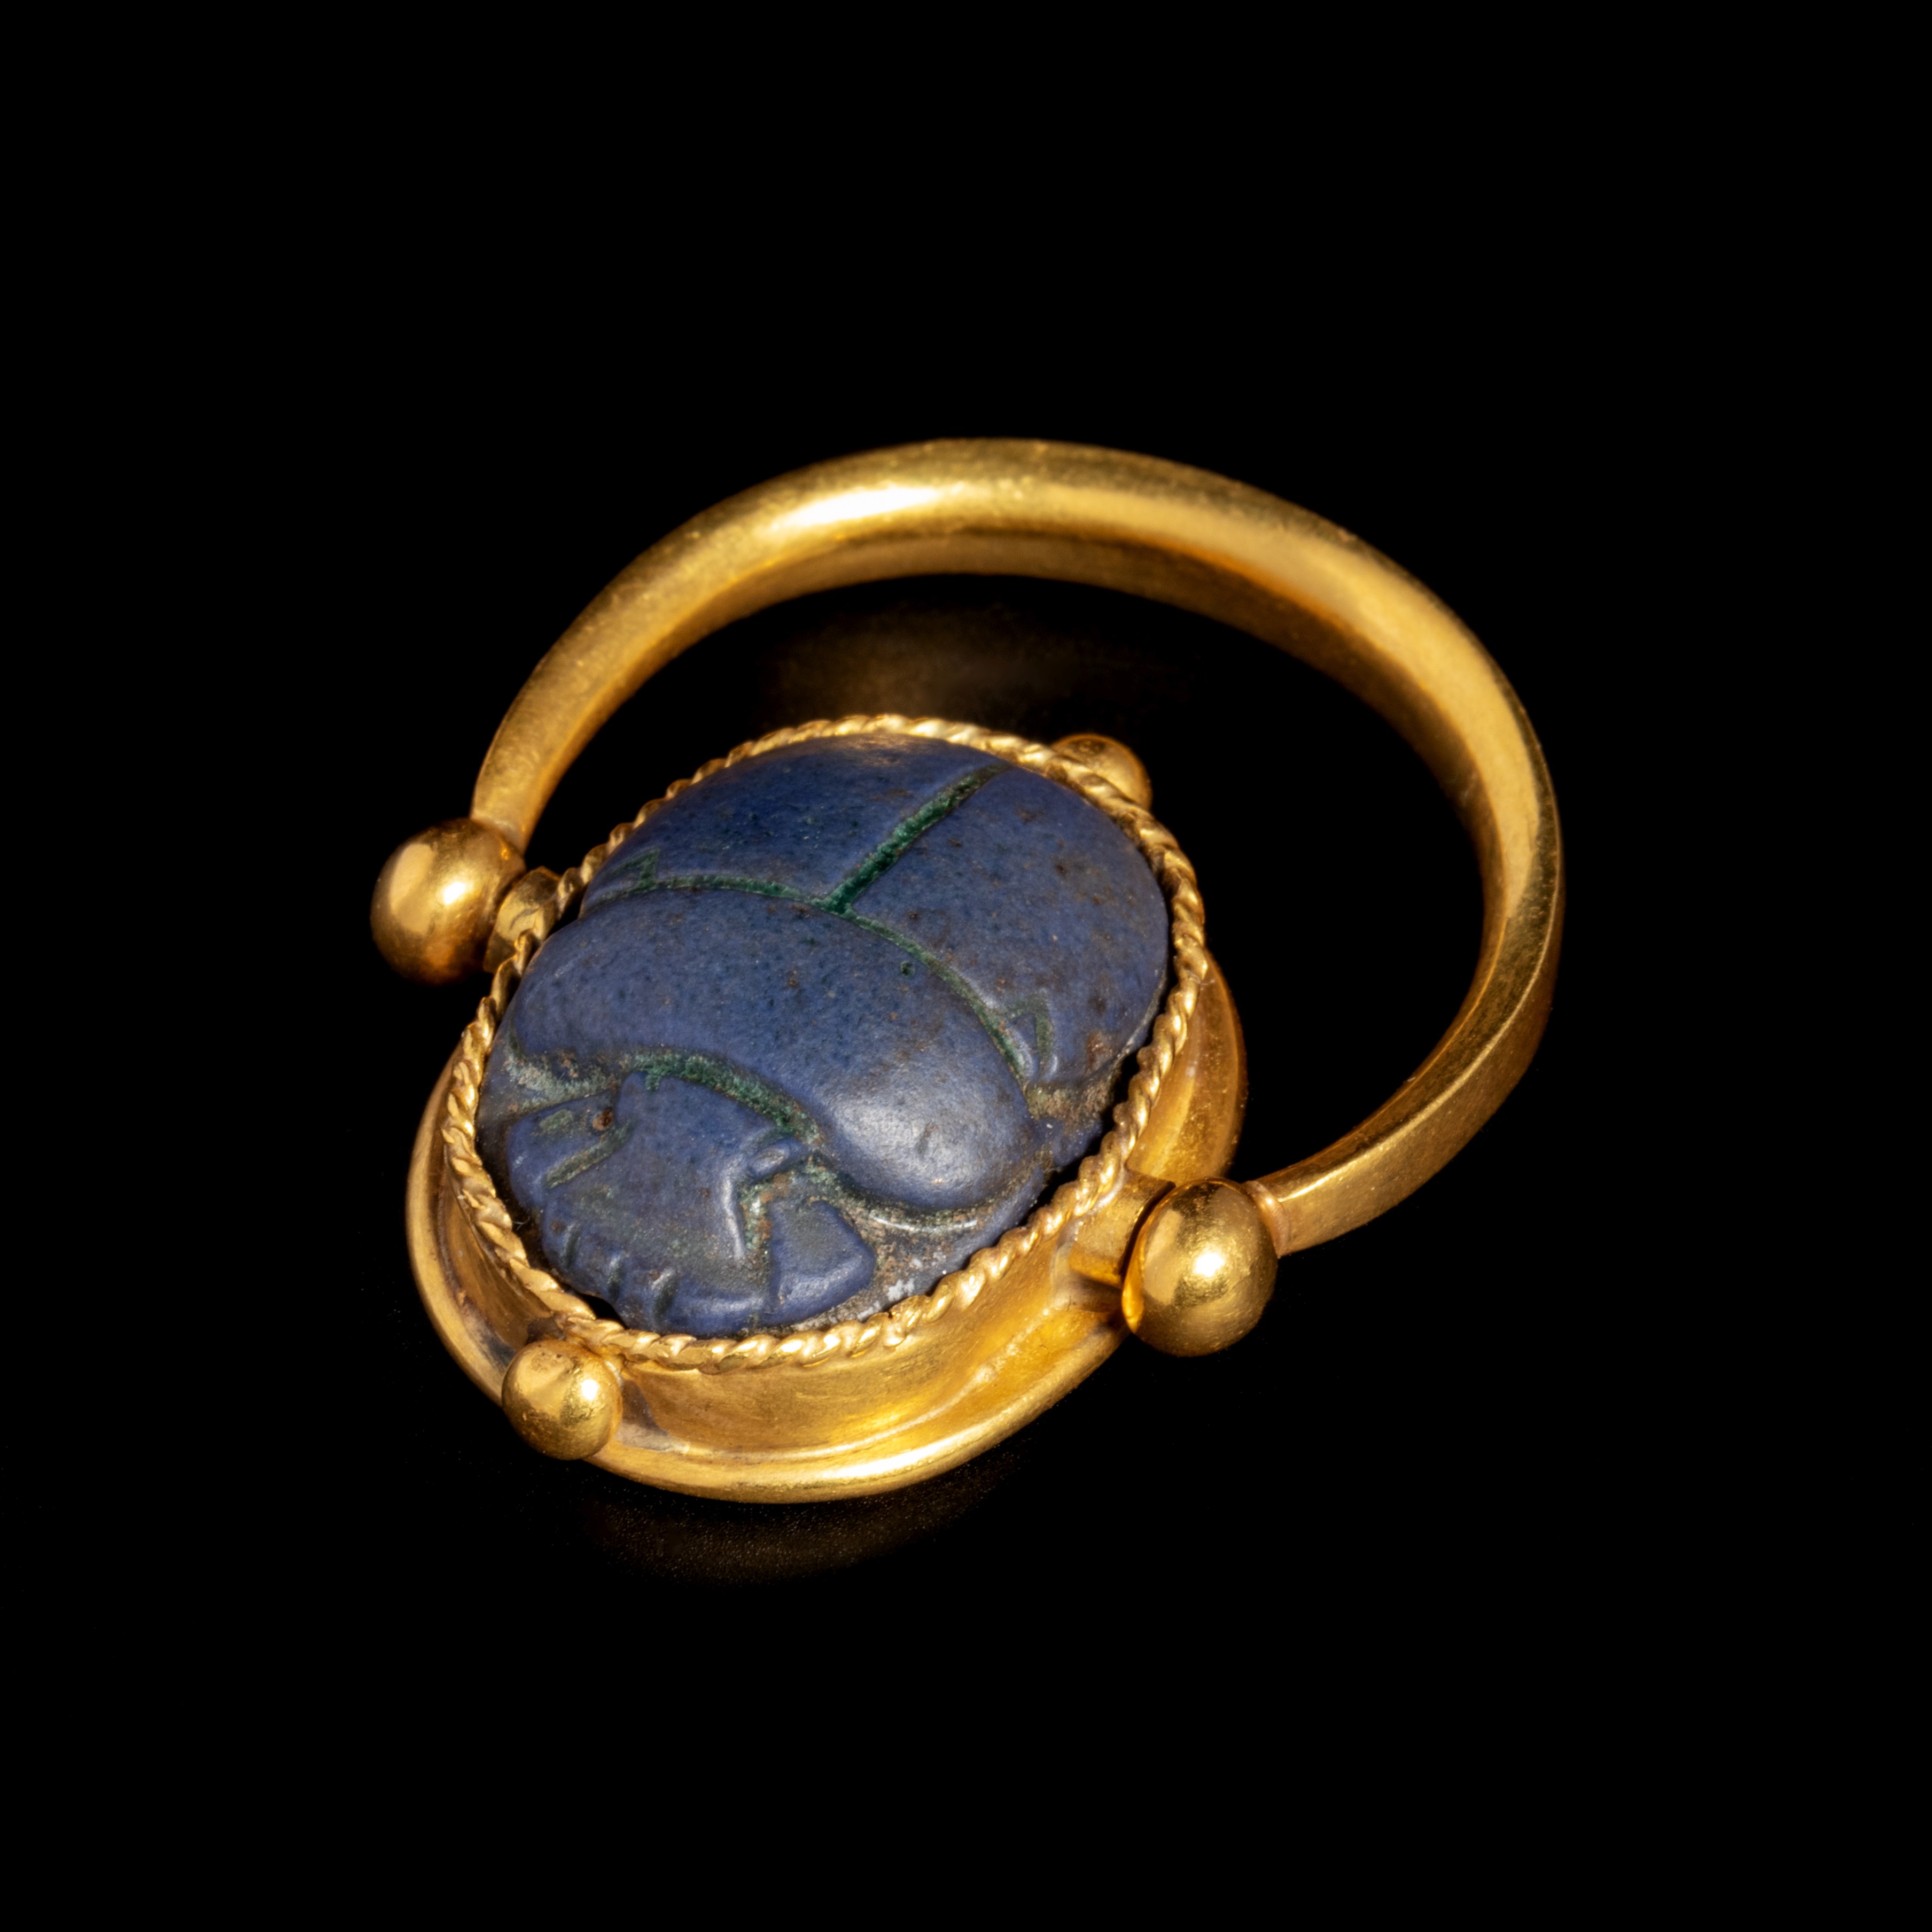 An Egyptian Faience Scarab Swivel Ring Ring size 7 1/2; Length of scarab 1/2 inch (1.25 cm). - Image 3 of 4